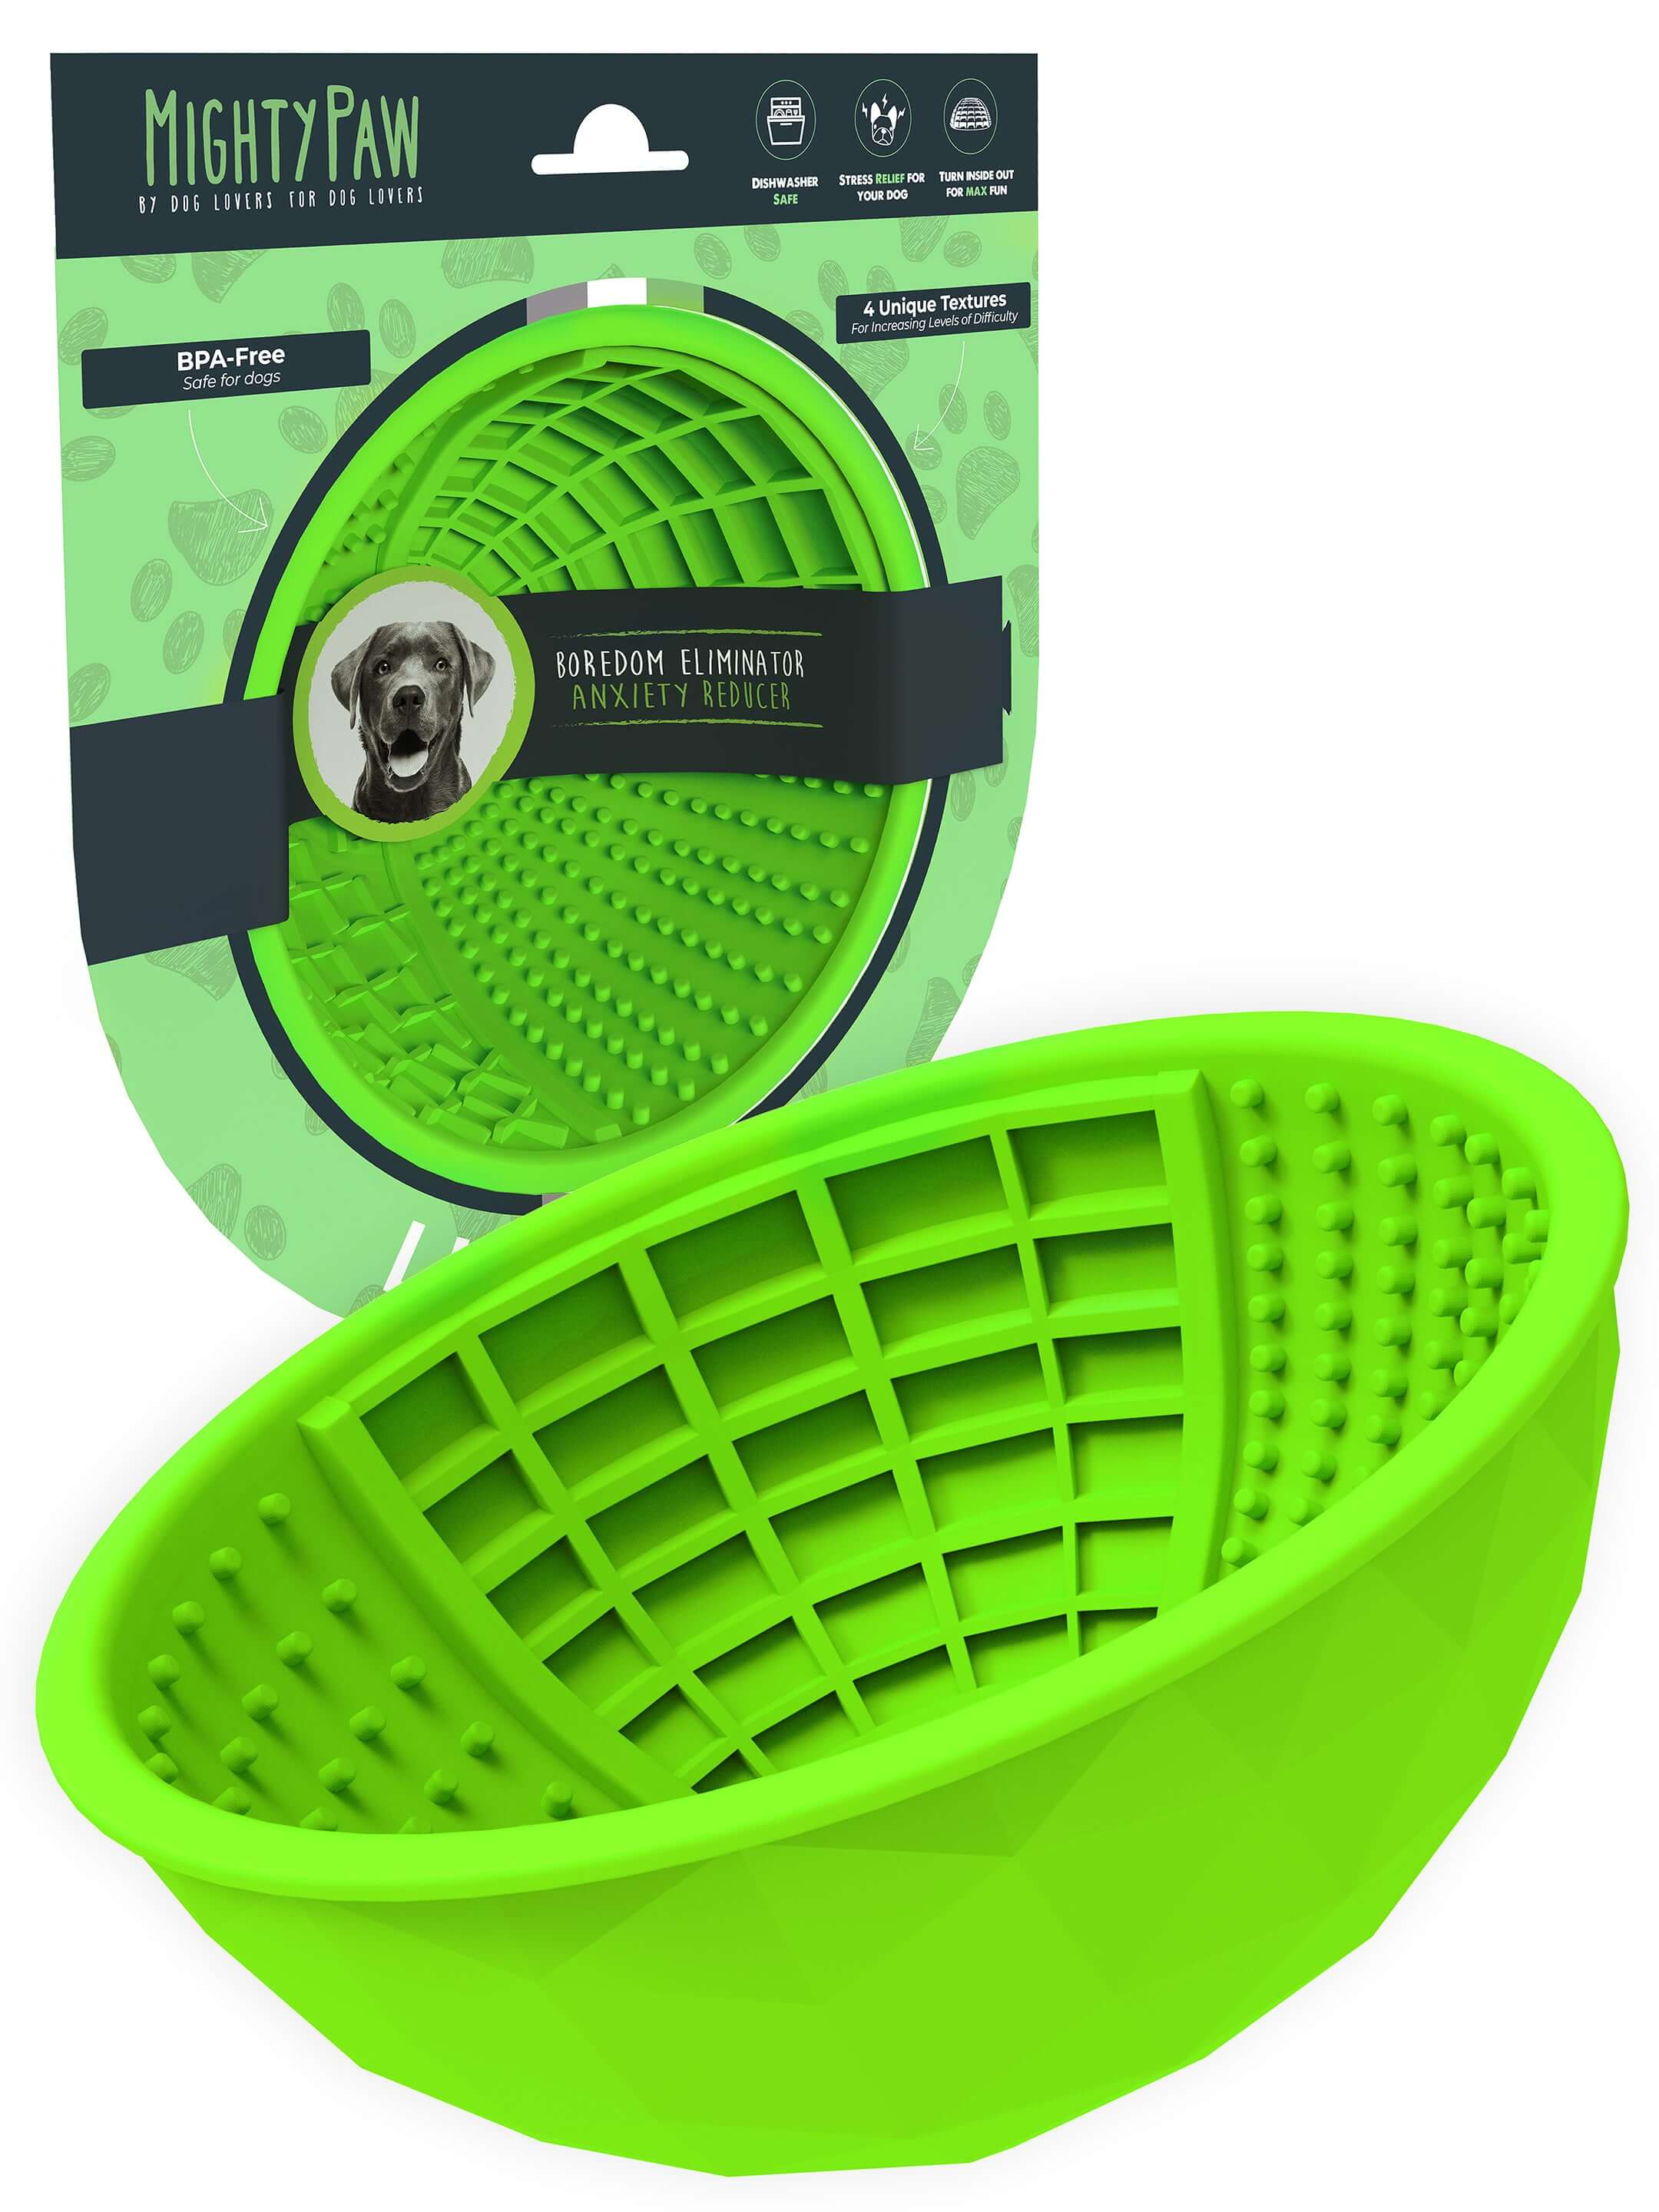 Mighty Paw Interactive Dog Lick Bowl: Mental Enrichment for Mealtime